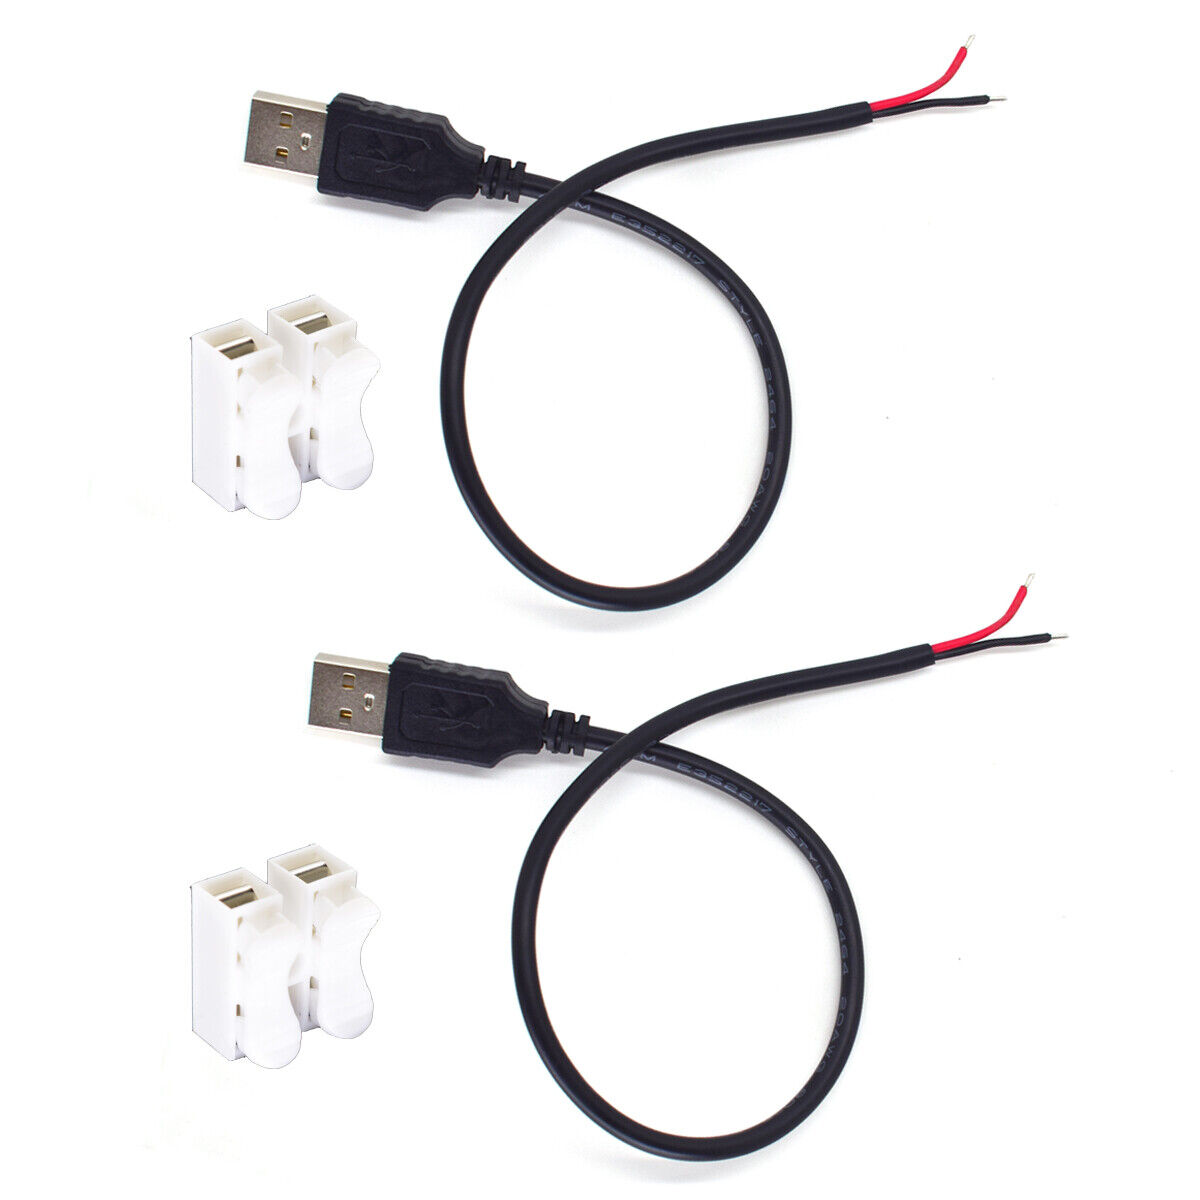 10pcs 0.3M/1FT USB Male to Bare Wire Cable 20AWG 5A USB2.0 2pin Pigtail Cable